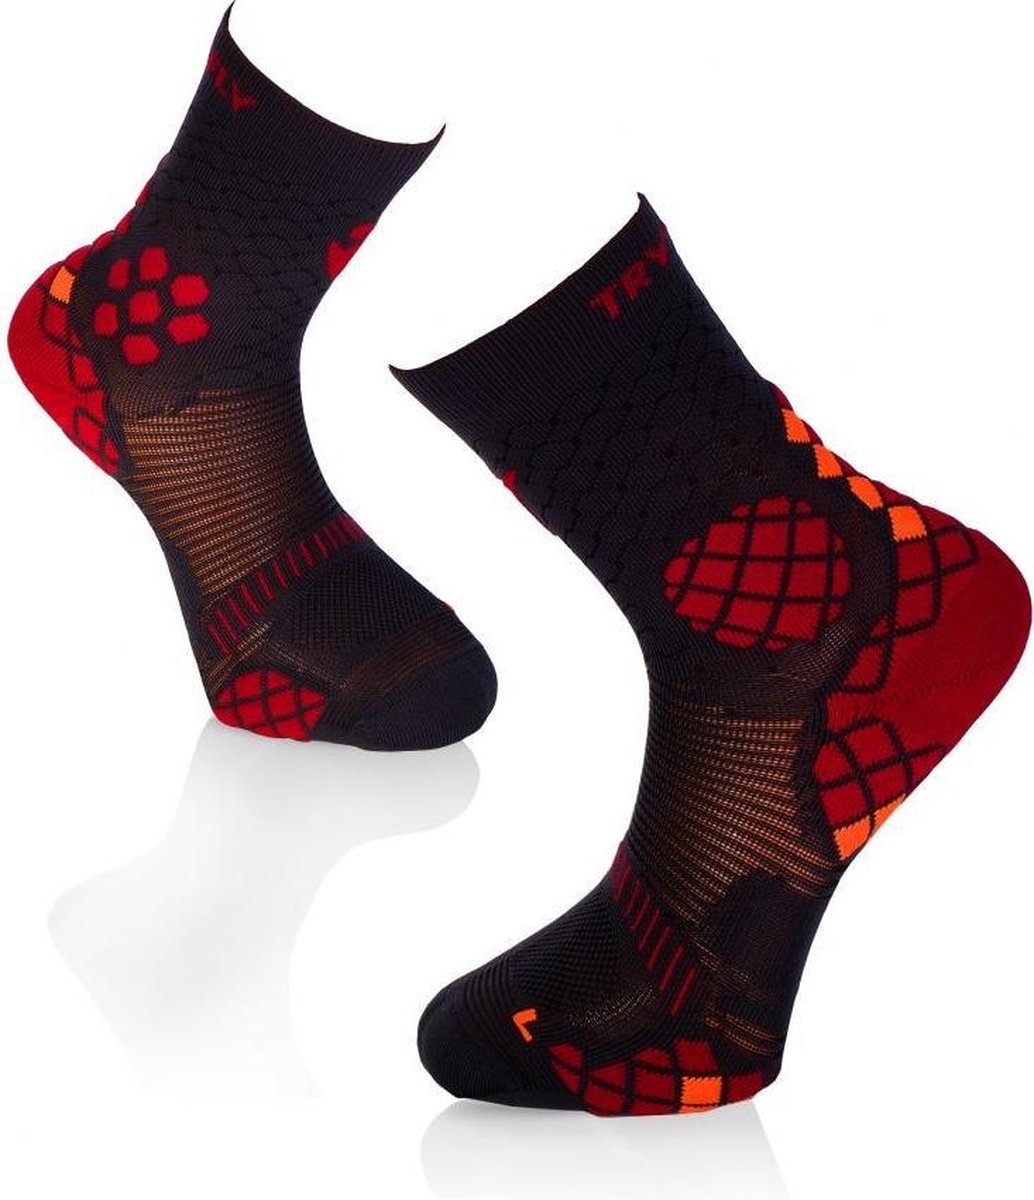 Compressie sokken Try To Fly Compressive Socks, anthracite and red, 39-42